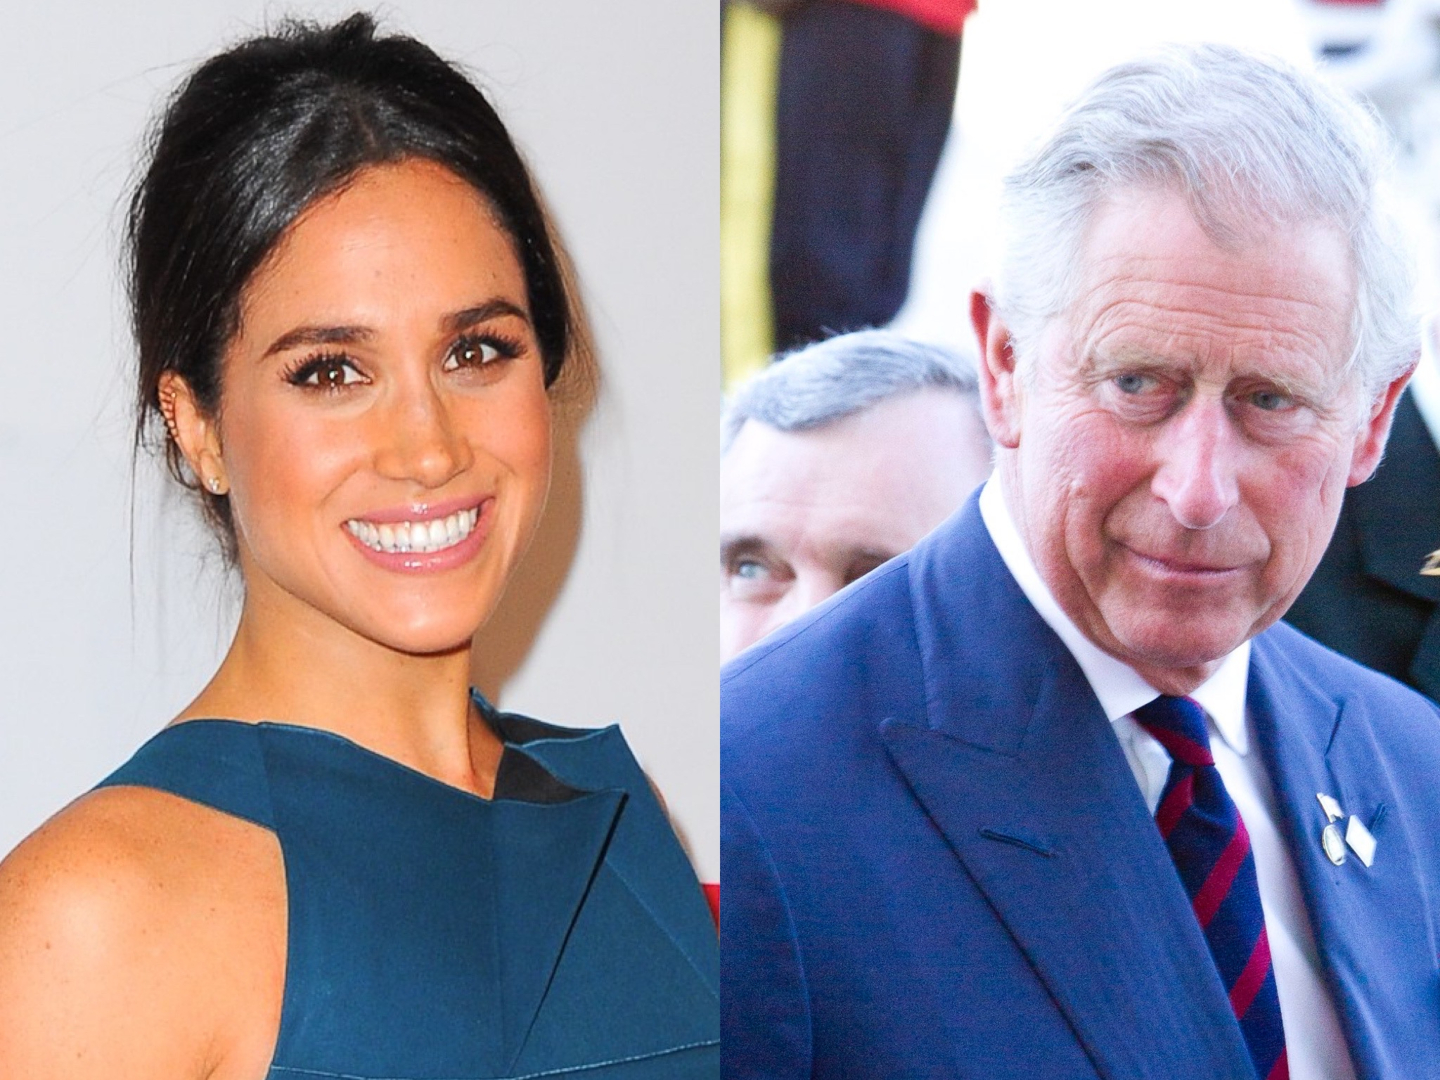 "Royal Splendor Unveiled: King Charles' Coronation Dazzles the World" And Unexpected Twist Of Meghan Markle, Children Absent from King Charles' Coronation"